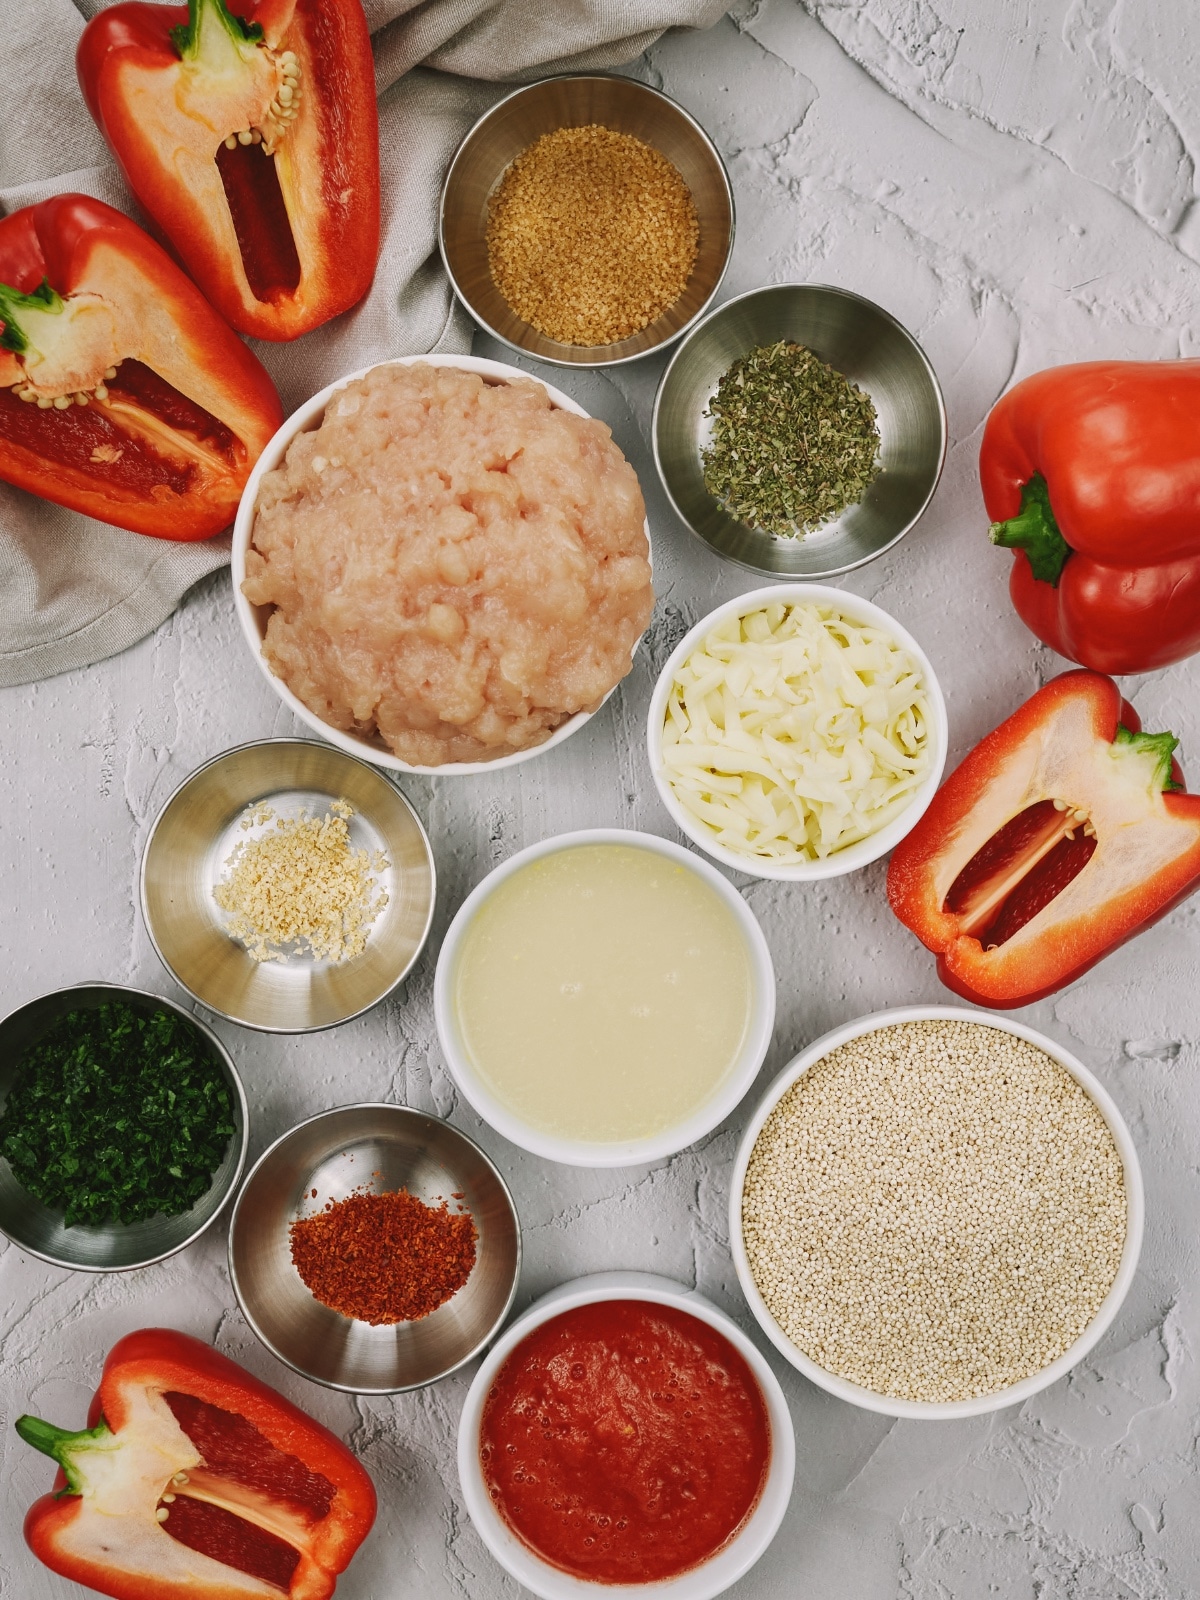 ingredients for stuffed pepper casserole in small bowls on a white surface